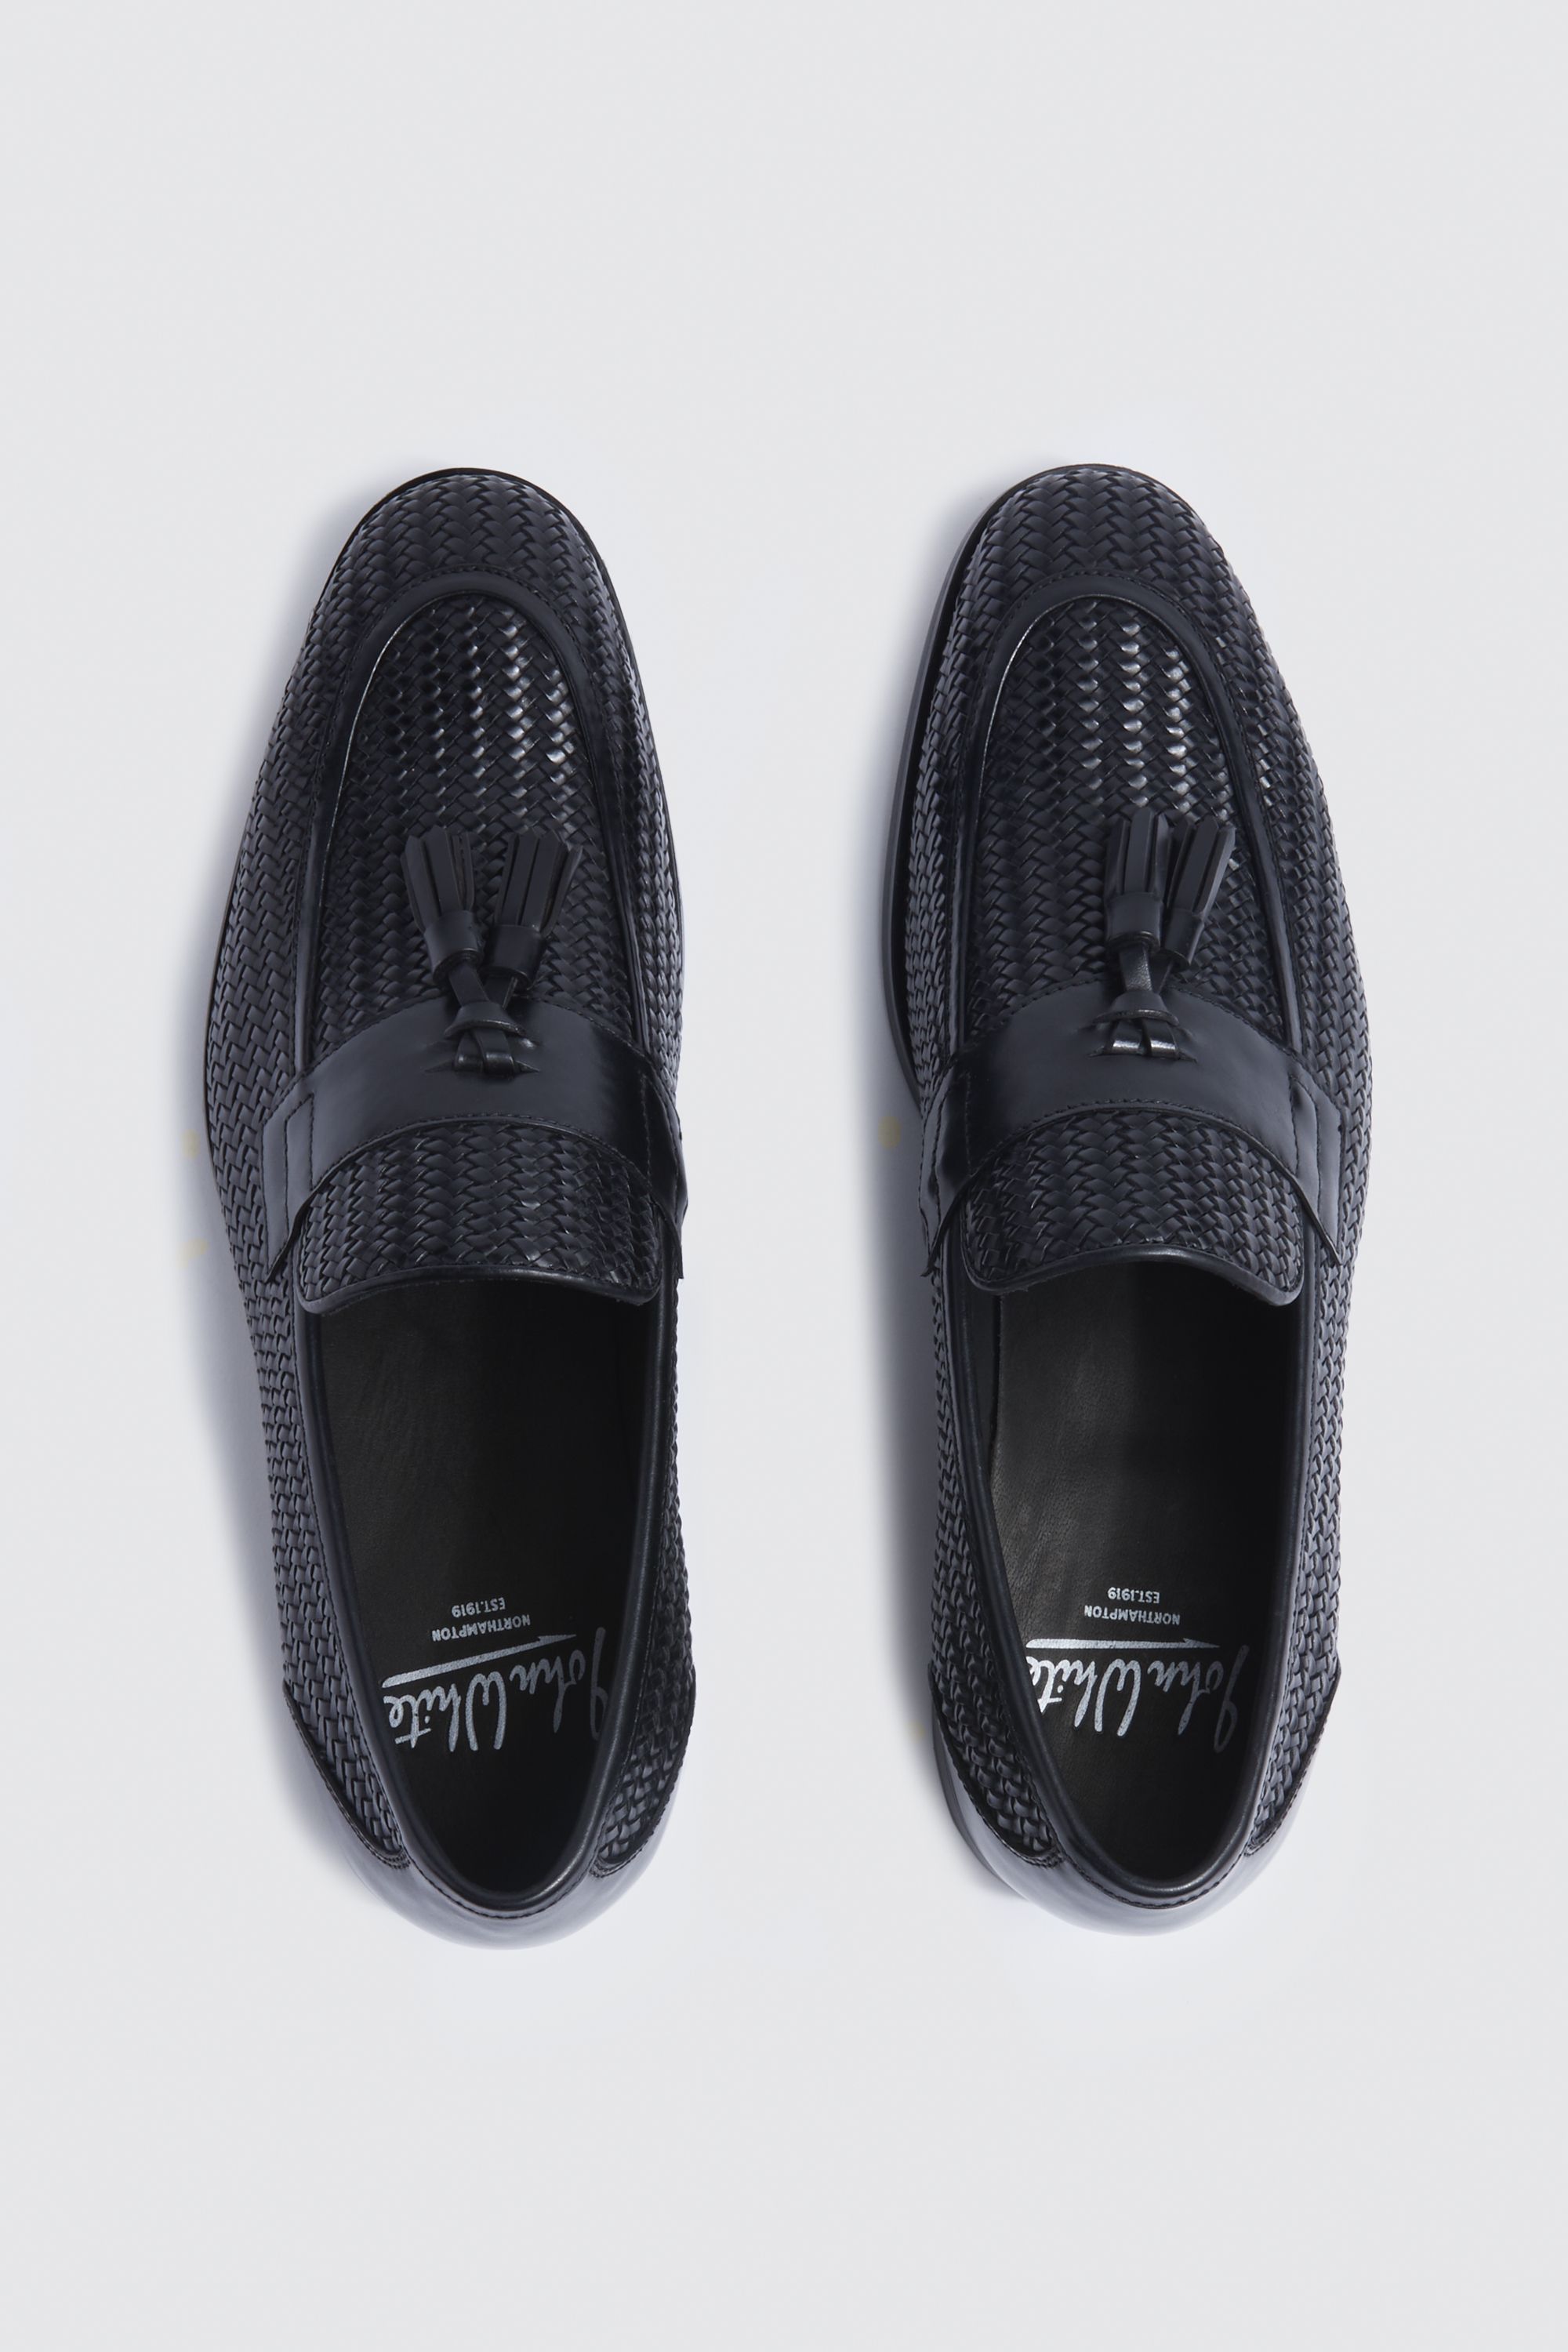 John White Duchy Black Woven Leather Loafers